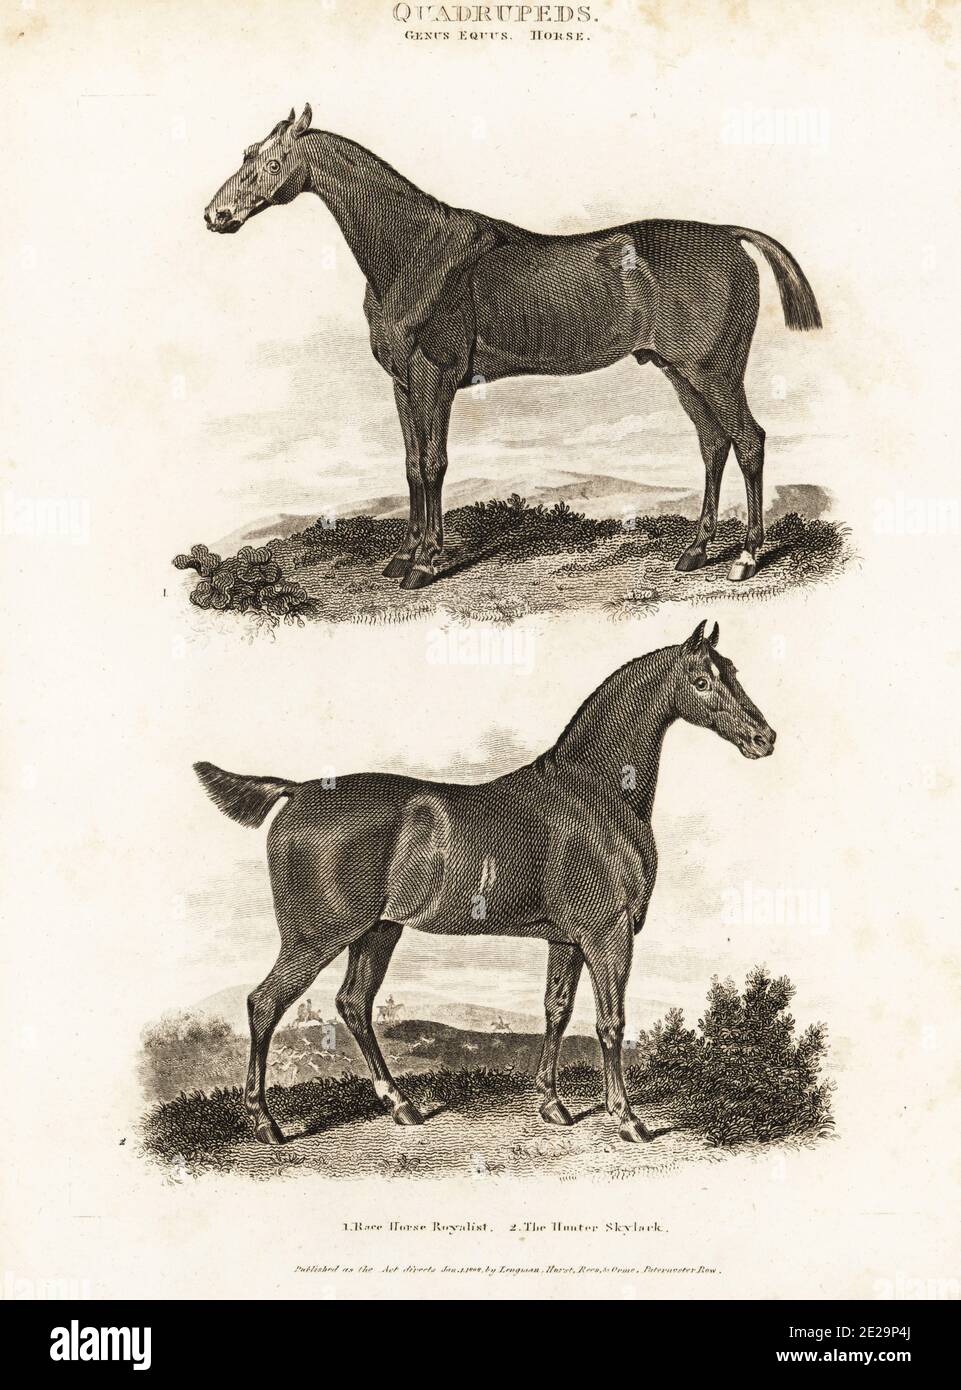 The race horse Royalist 1 and the hunter Skylark 2. Thoroughbred racing and hunting horses, Equus ferus caballus. Copperplate engraving from Abraham Rees' Cyclopedia or Universal Dictionary of Arts, Sciences and Literature, Longman, Hurst, Rees, Orme and Brown, London, 1808. Stock Photo